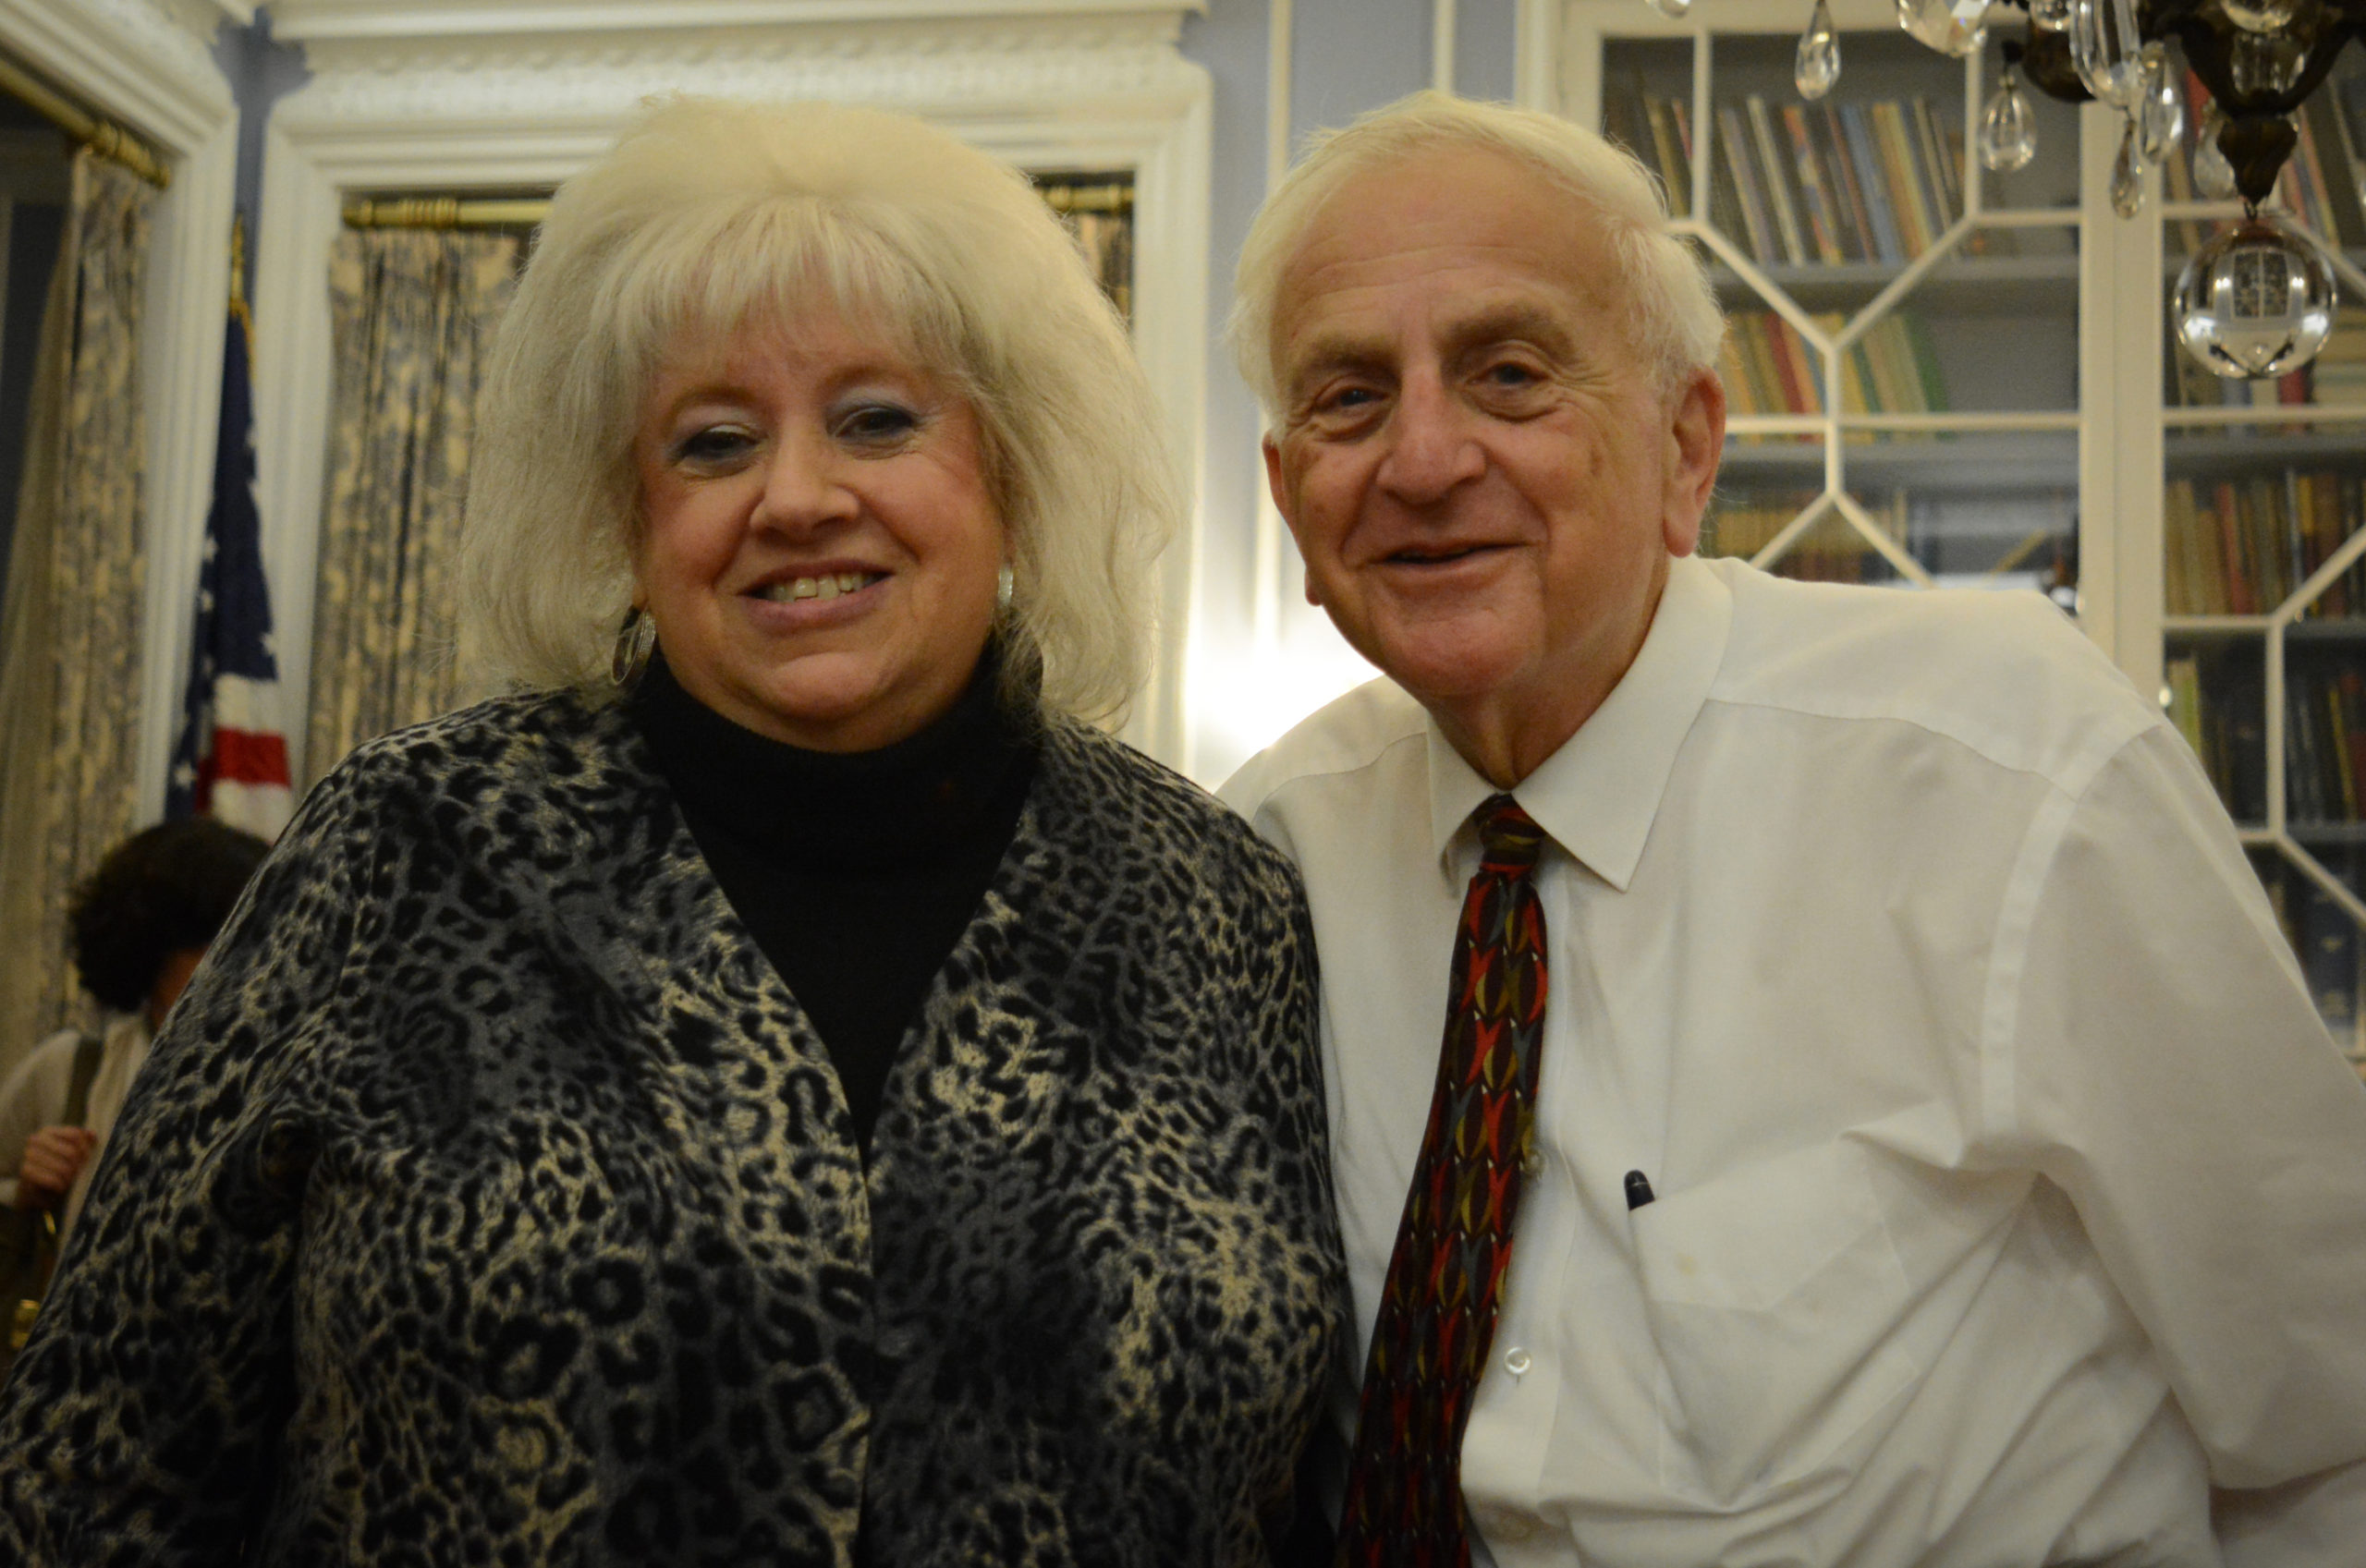 Barbara Berkowitz and Donald Ashkenase were both re-elected to serve on the Great Neck school board. (Photo by Janelle Clausen)